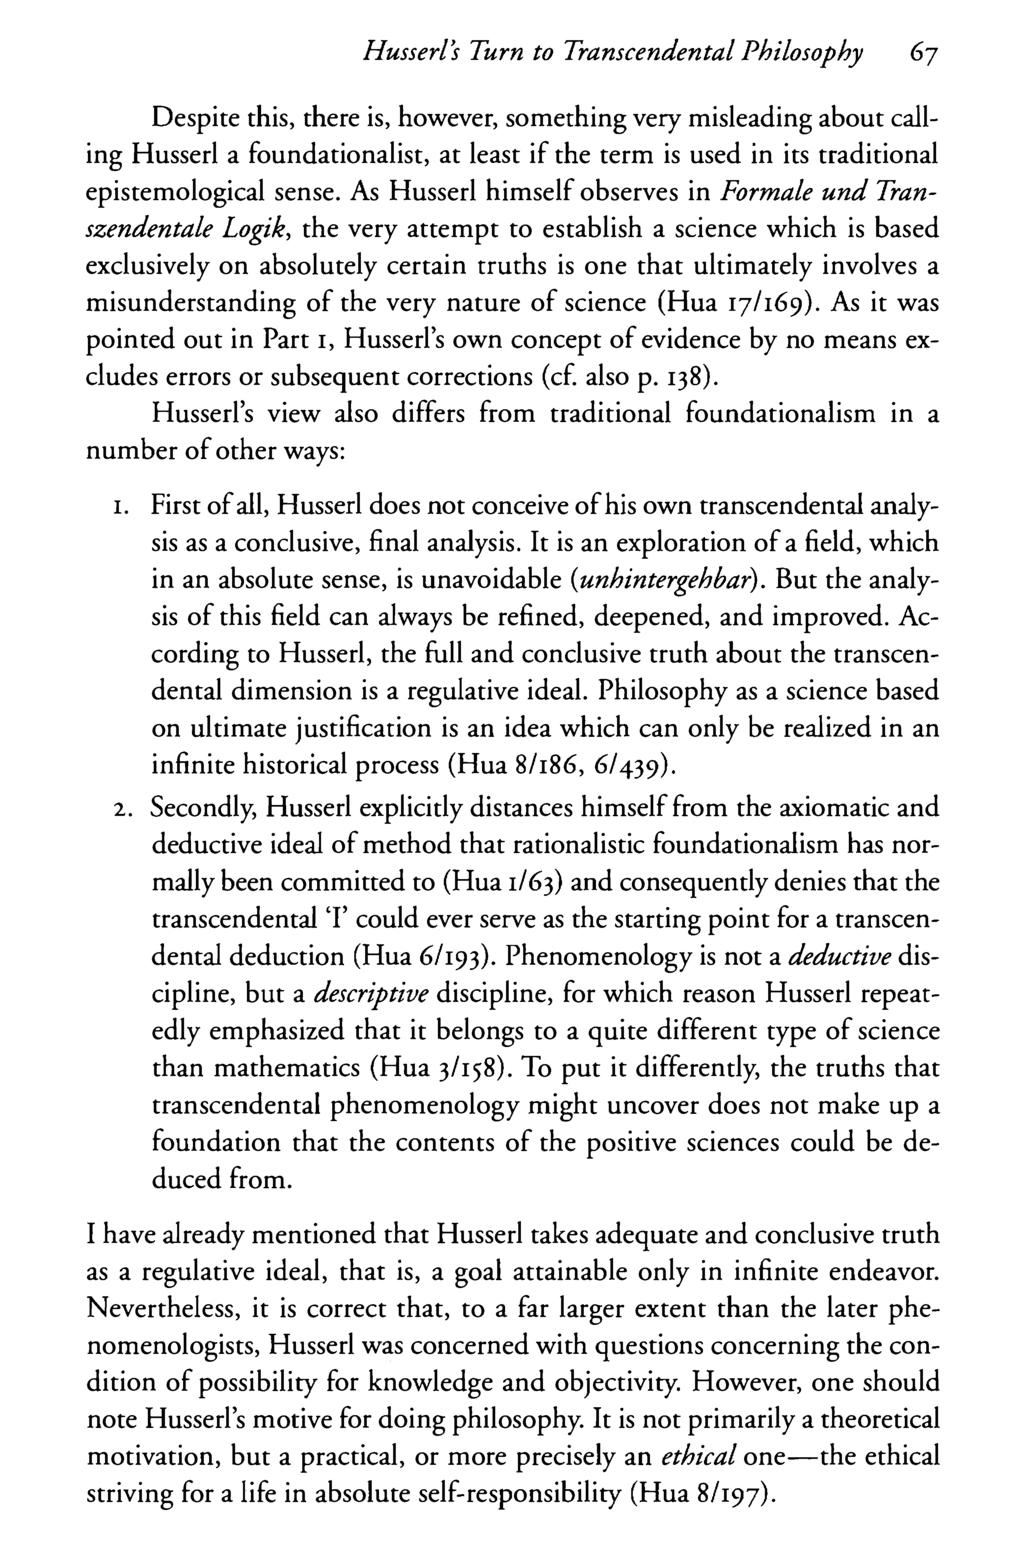 Husserls Turn to Transcendental Philosophy 6j Despite this, there is, however, something very misleading about calling Husserl a foundationalist, at least if the term is used in its traditional